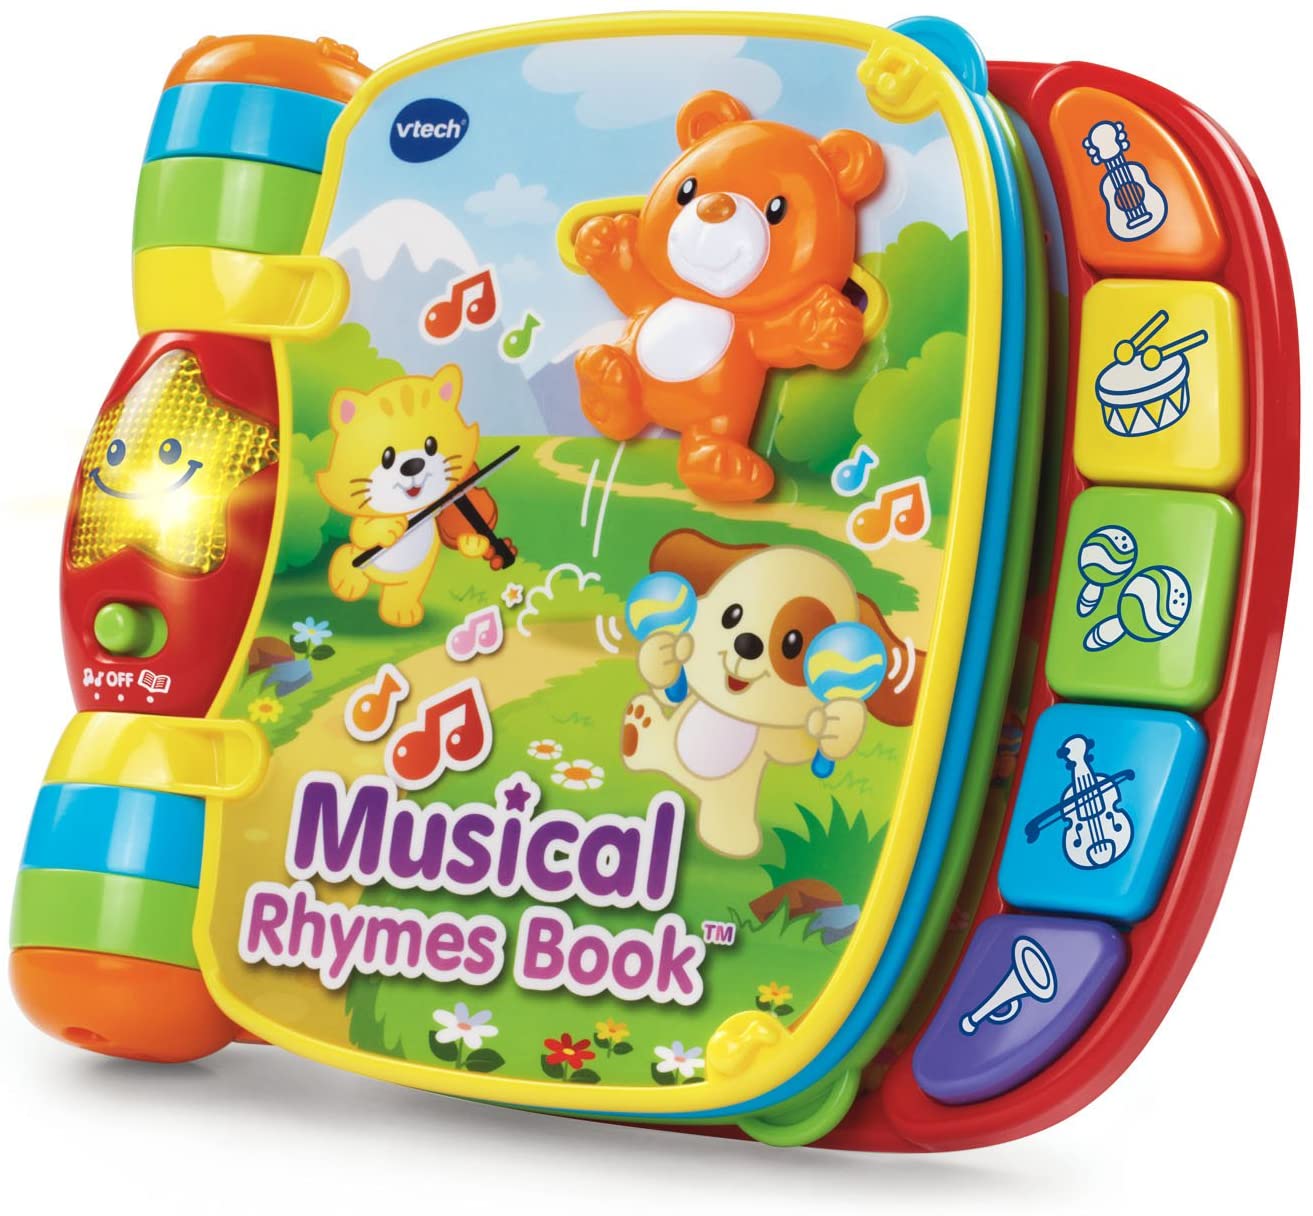 VTech Musical Rhymes Book, Red -  Classic Nursery Rhymes